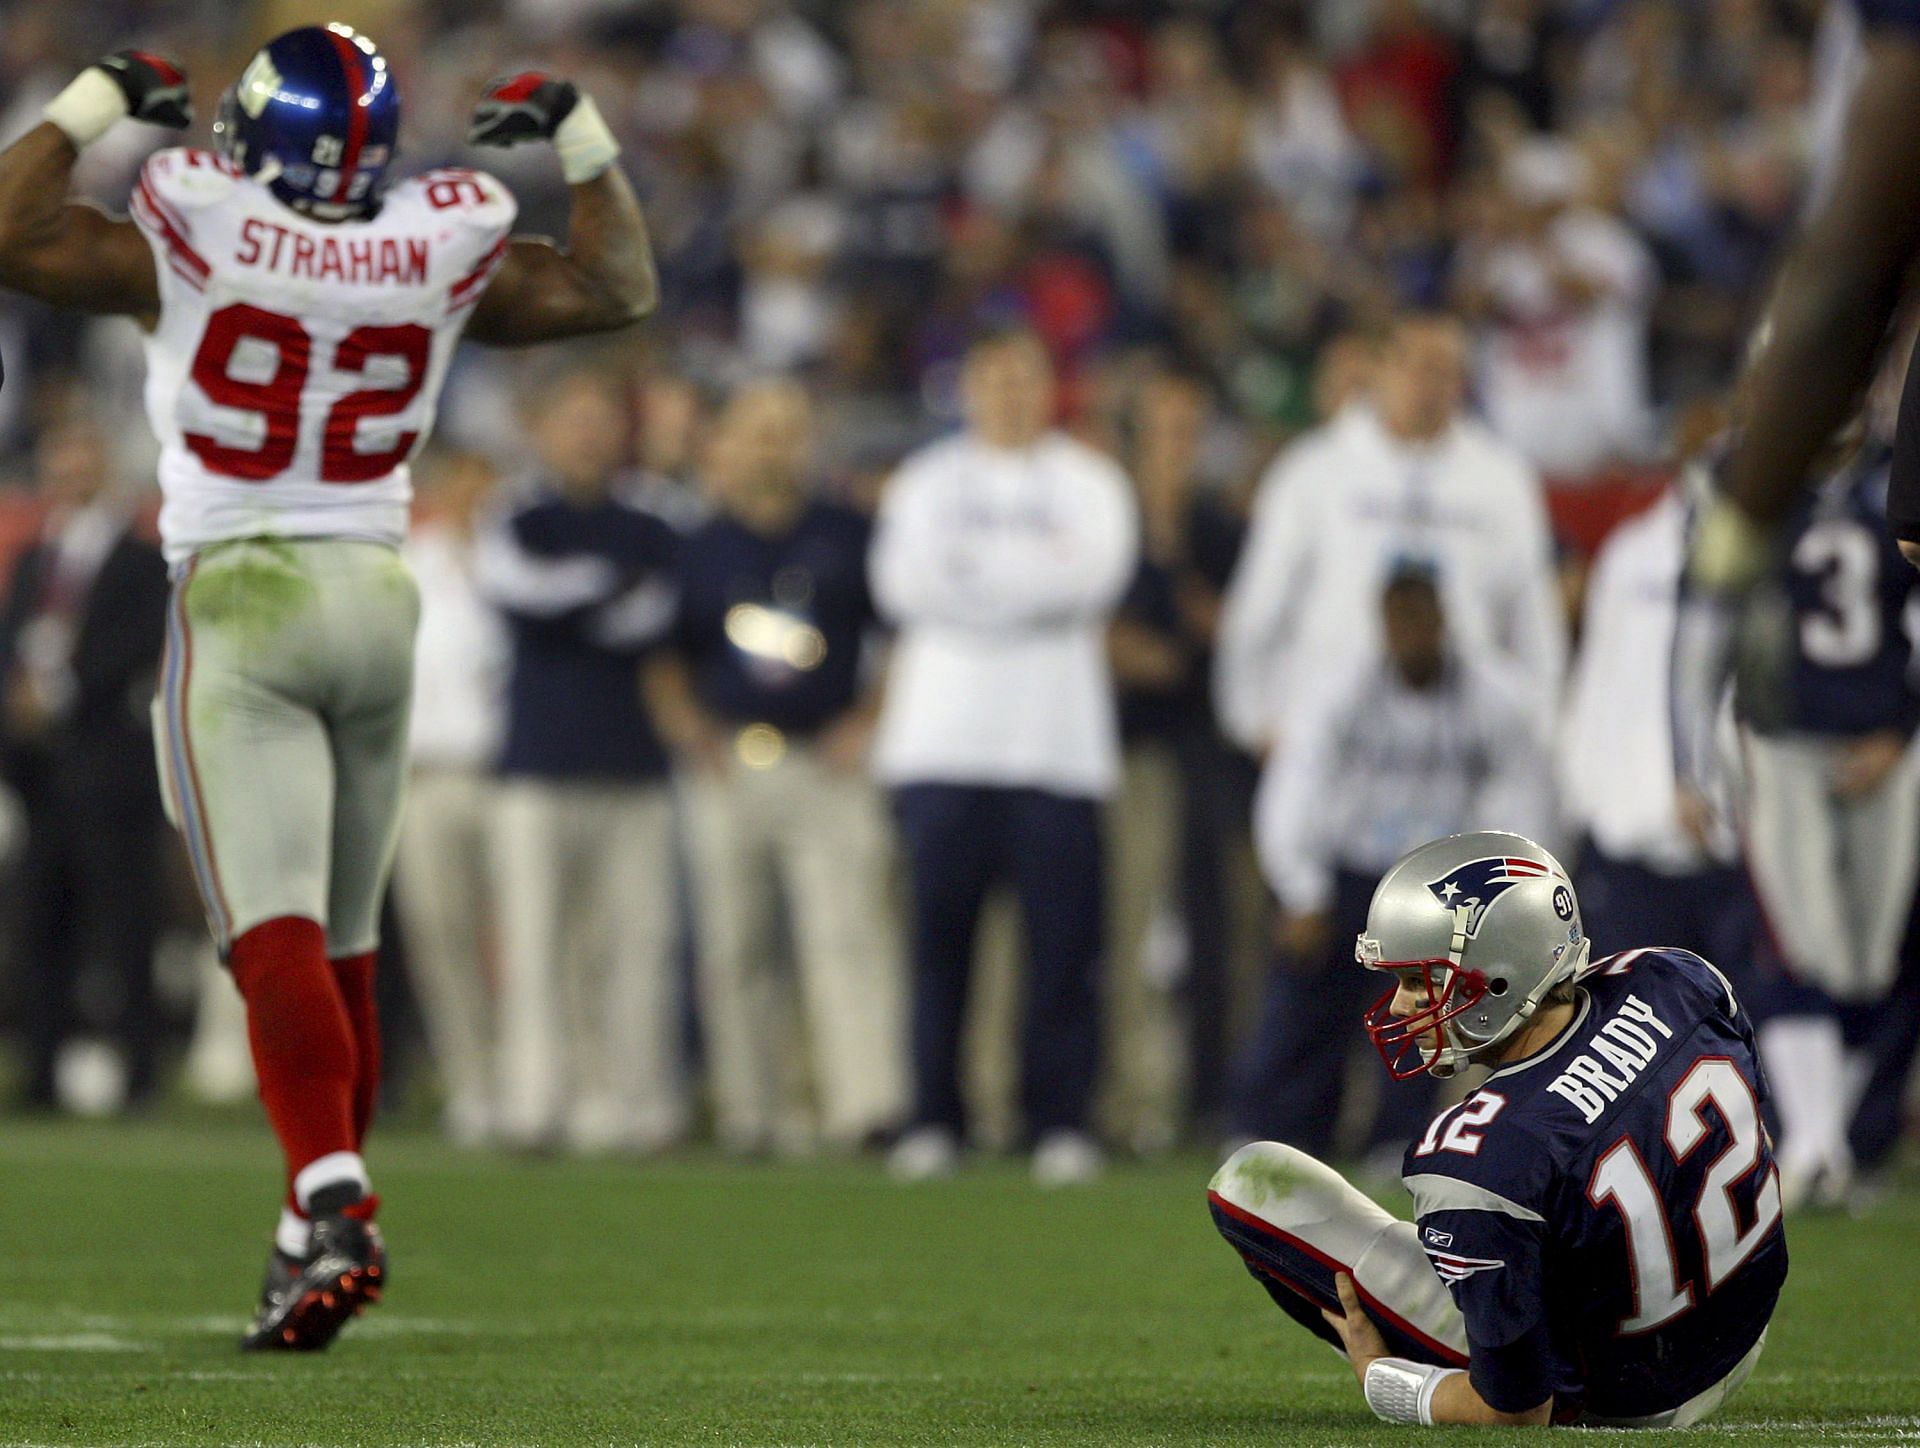 Tom Brady (#12) of the New England Patriots after being tackled by Michael Strahan (#92) of the New York Giants; Super Bowl XLII